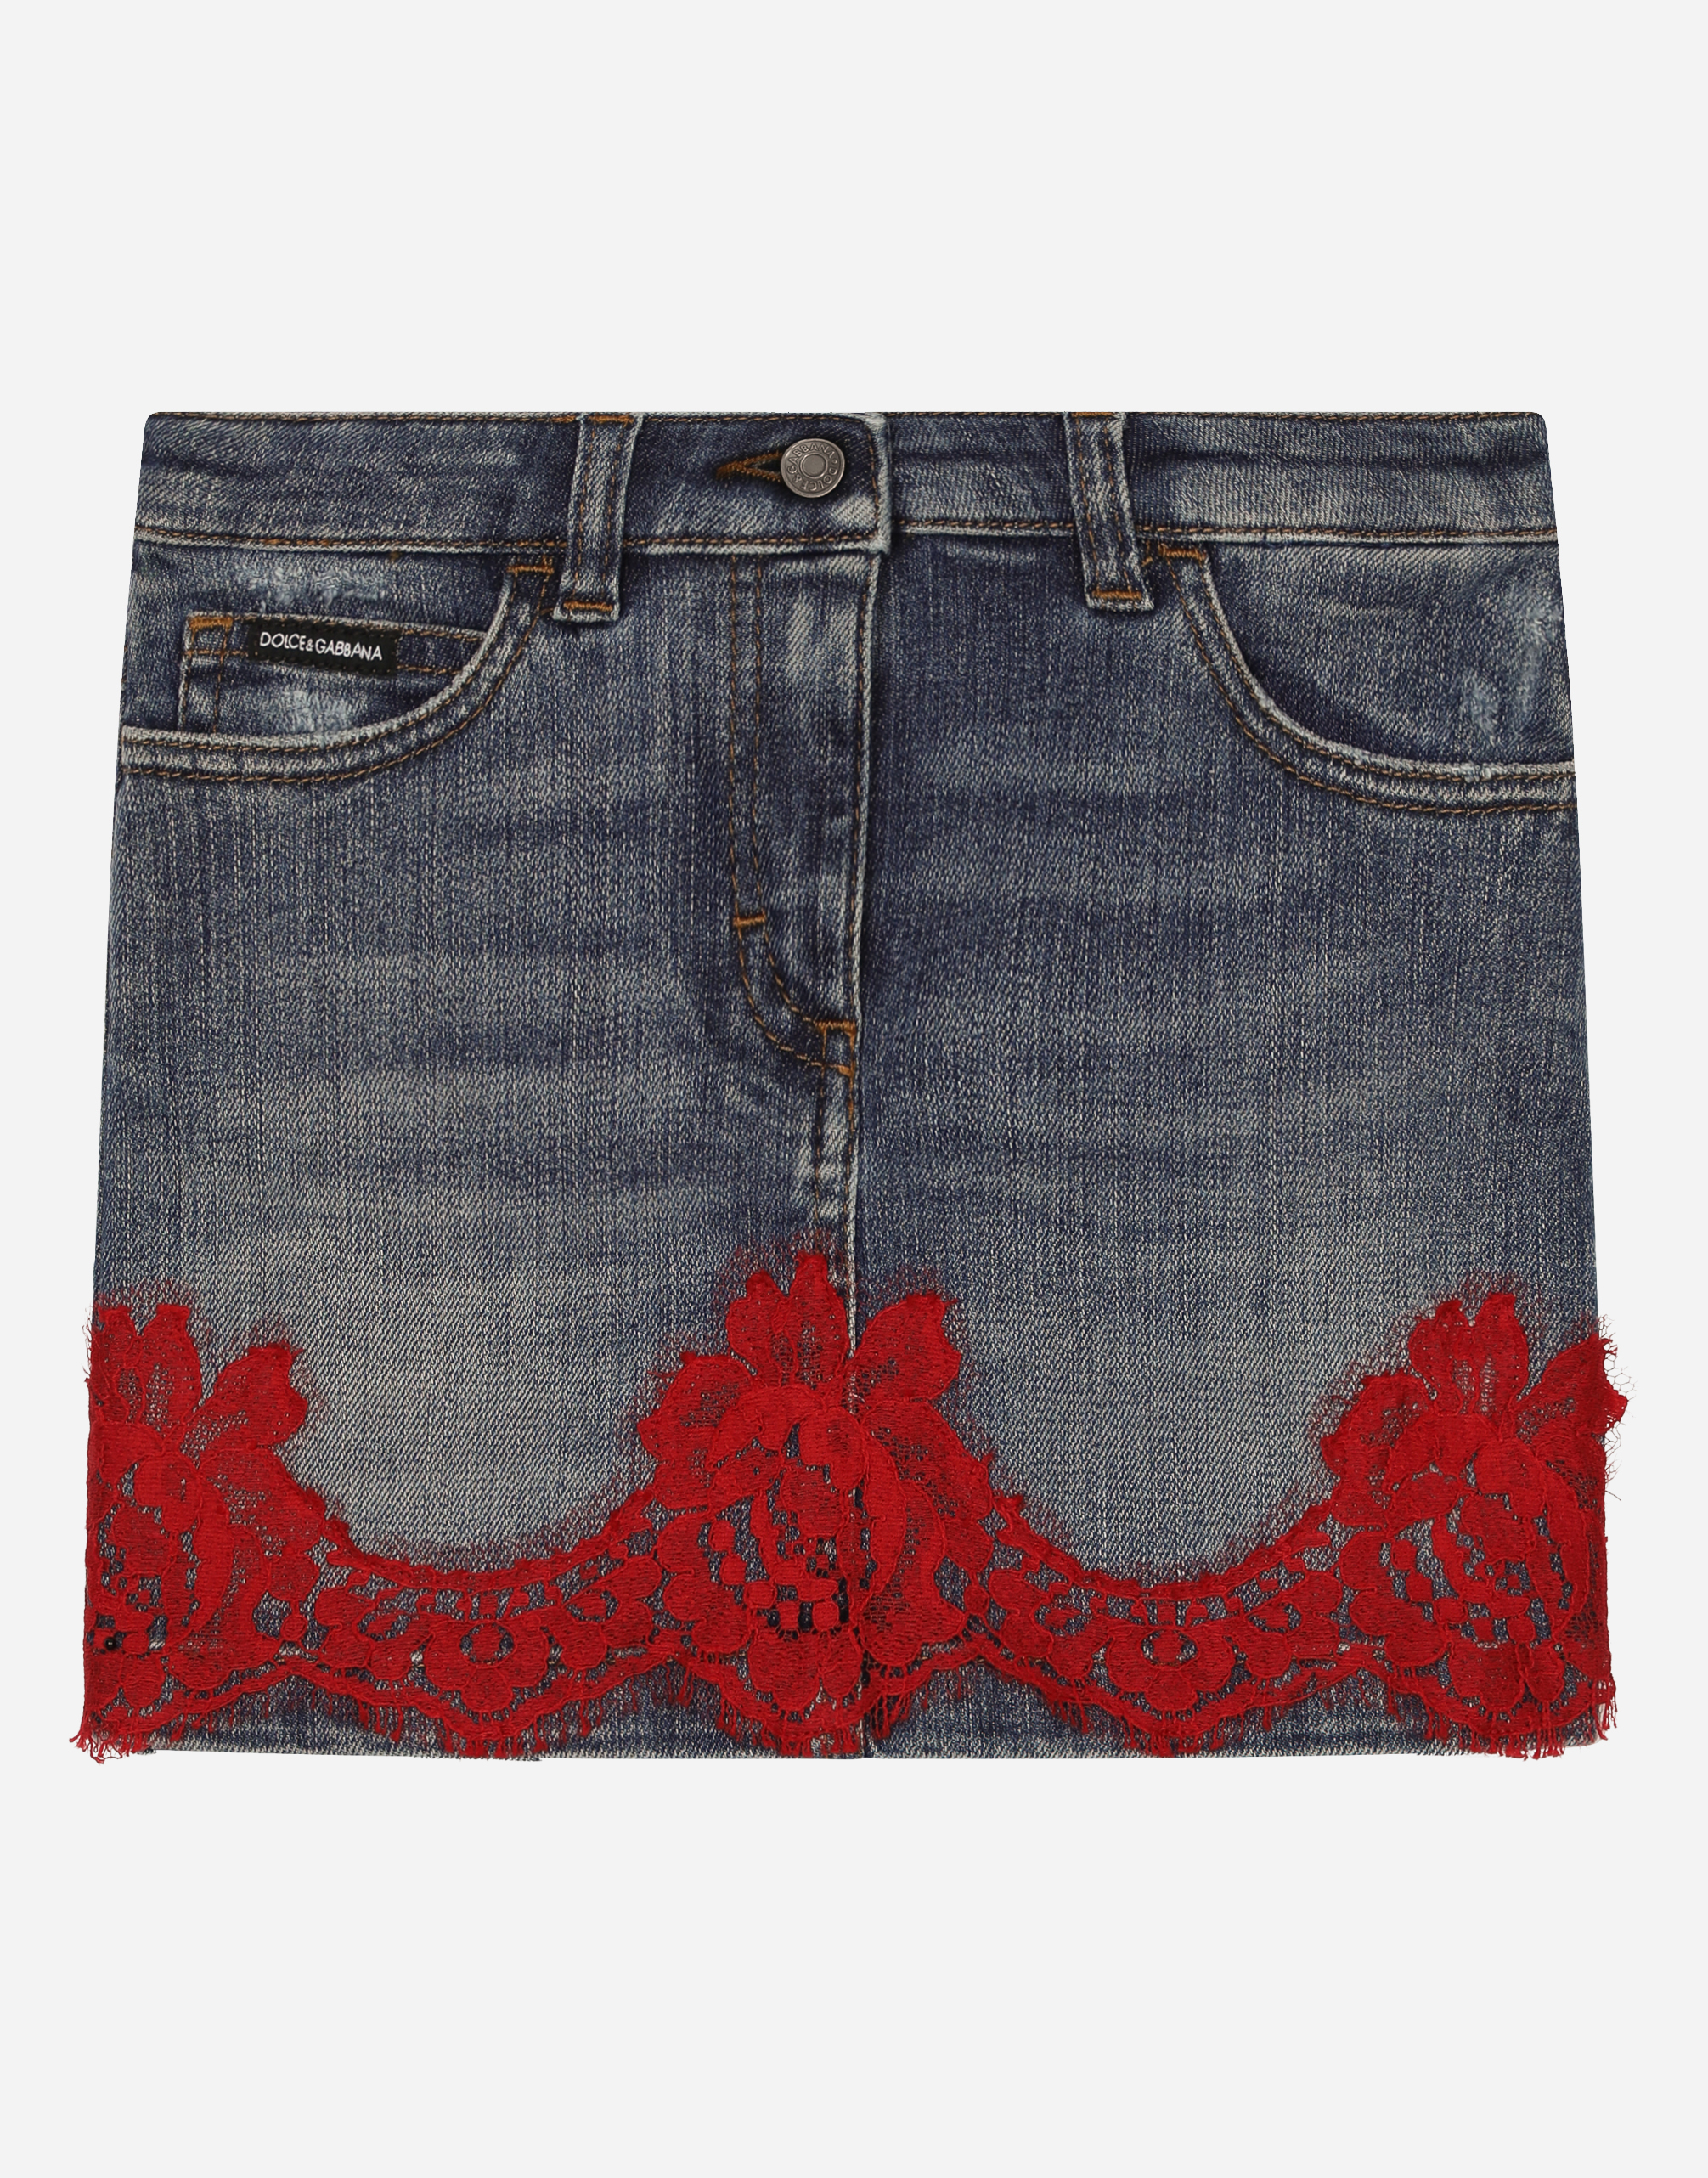 Short denim skirt with lace insert in Multicolor